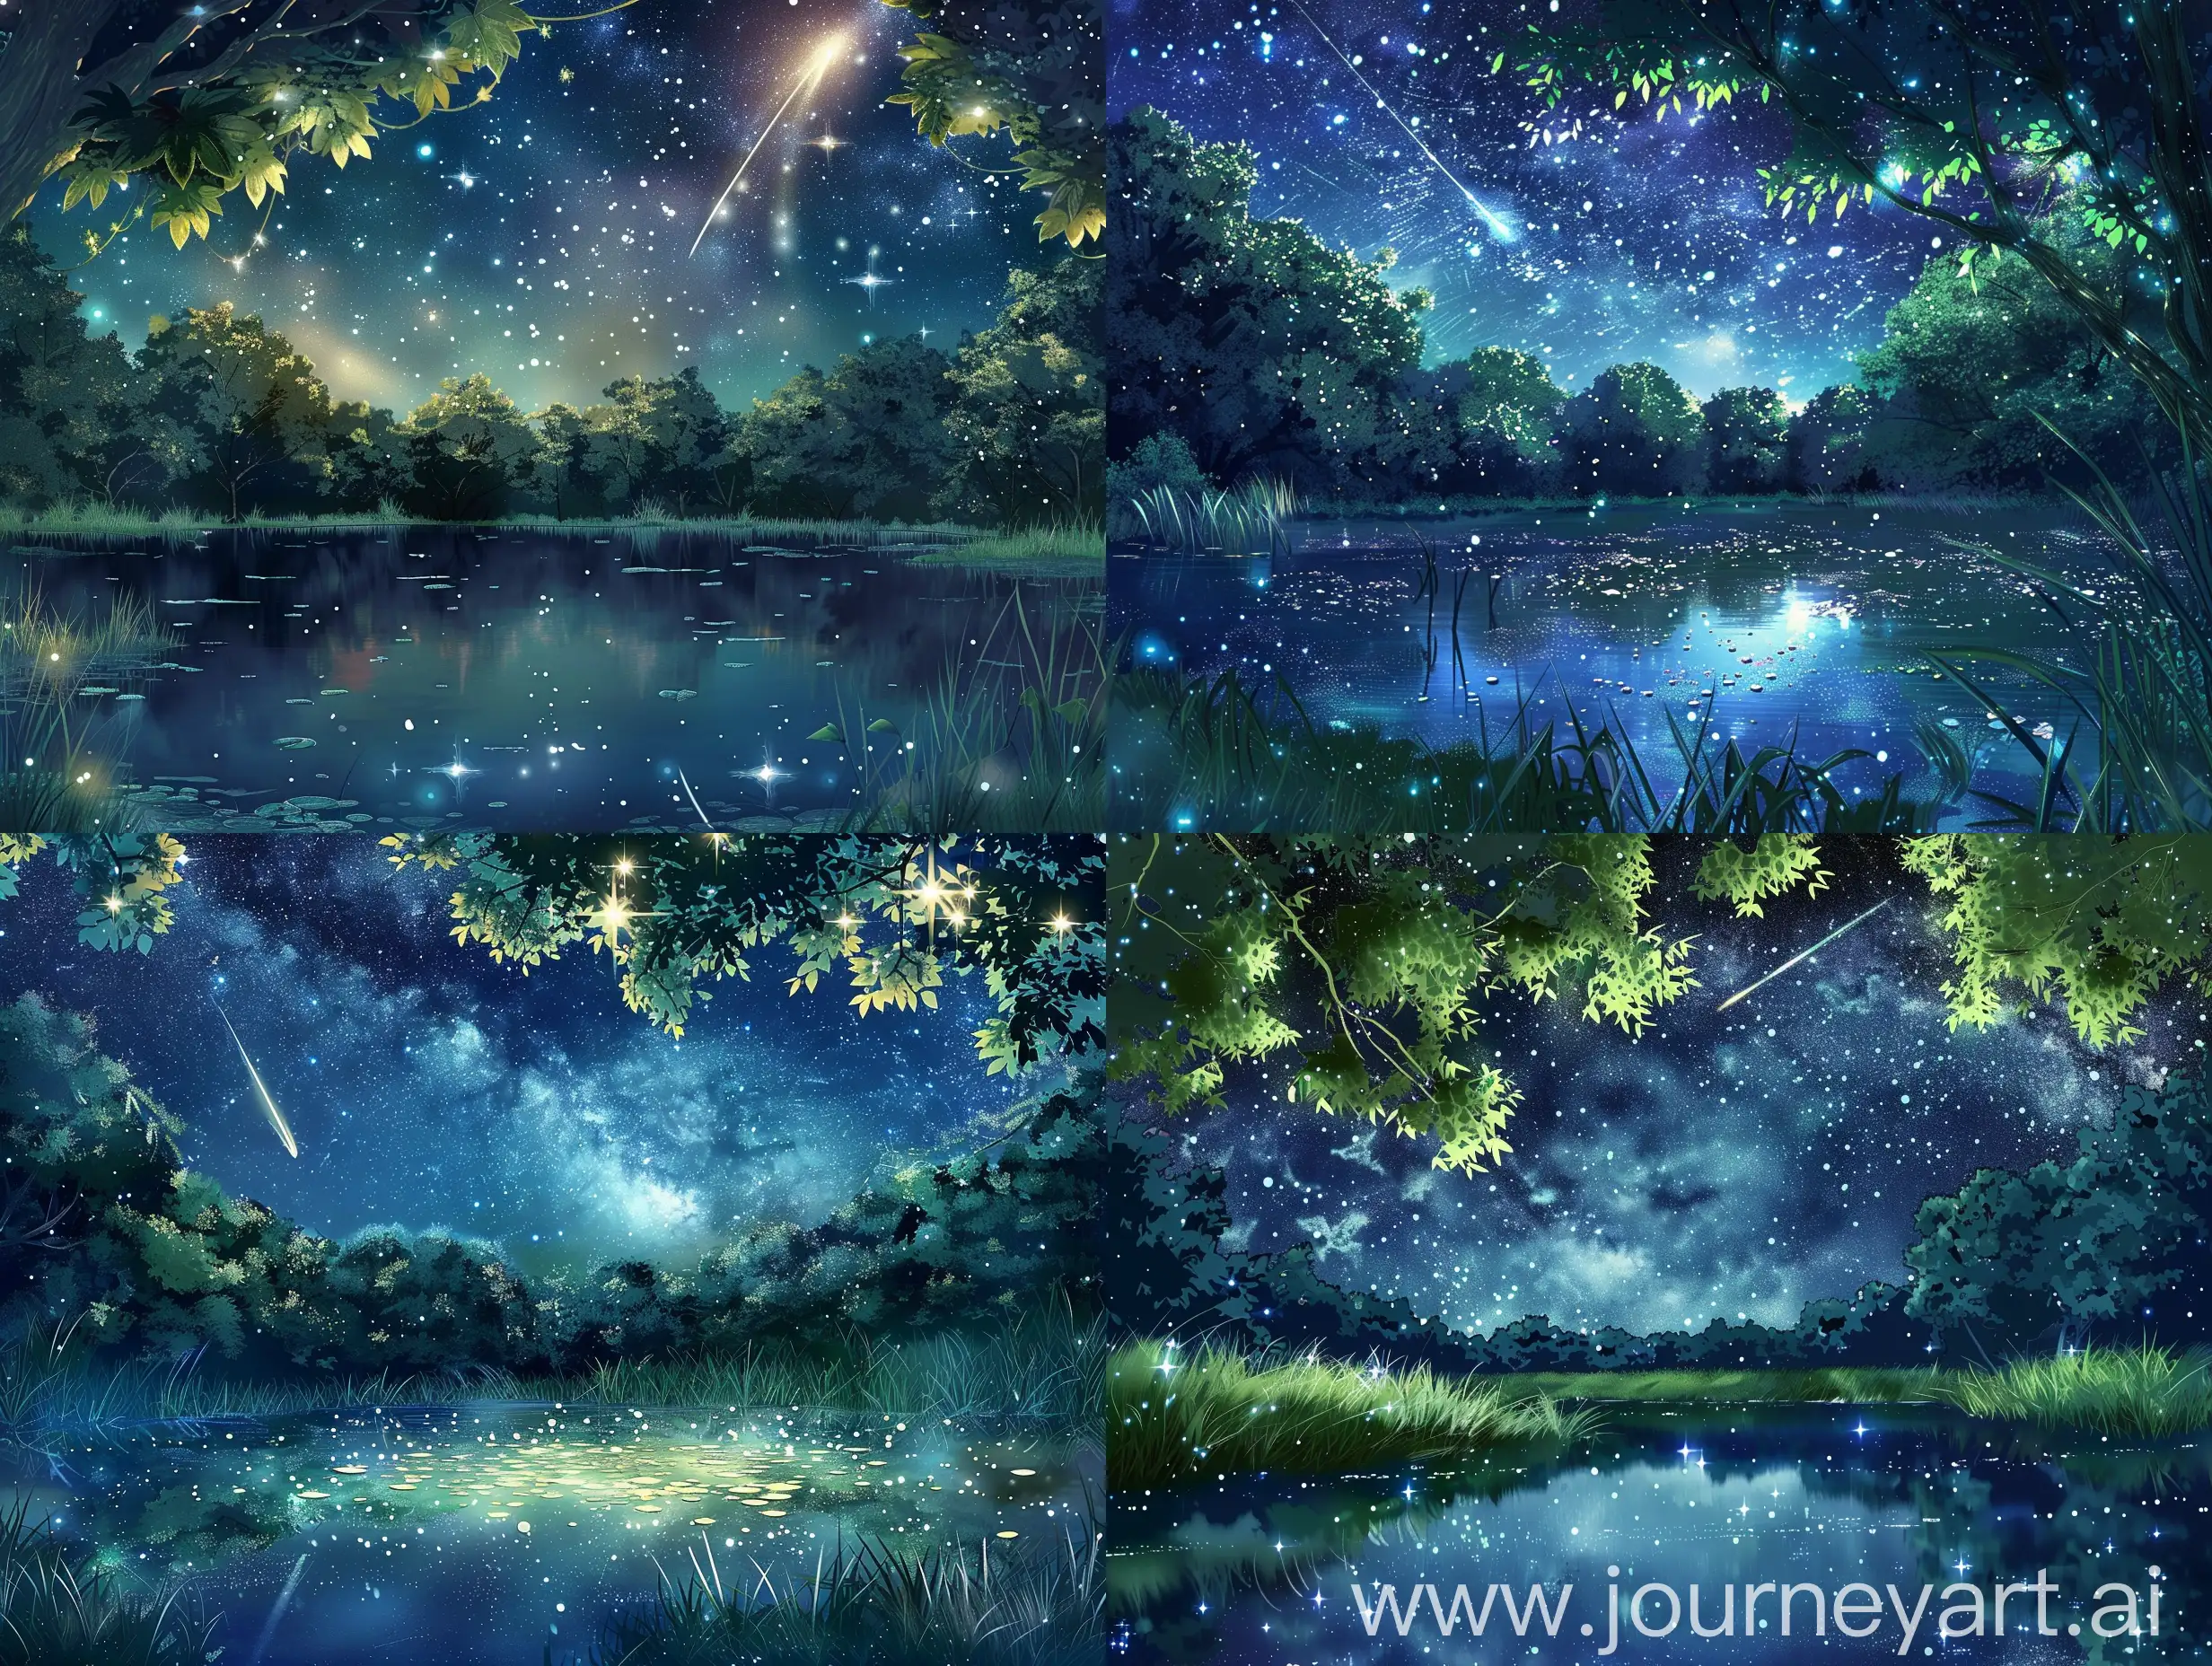 A pond surrounded by trees and grass, the night sky full of stars and a shooting star.  There are tree leaves above the water pond, and those leaves glow strangely.  The starry sky is reflected in the water in the pond.  Fantasy, anime style.